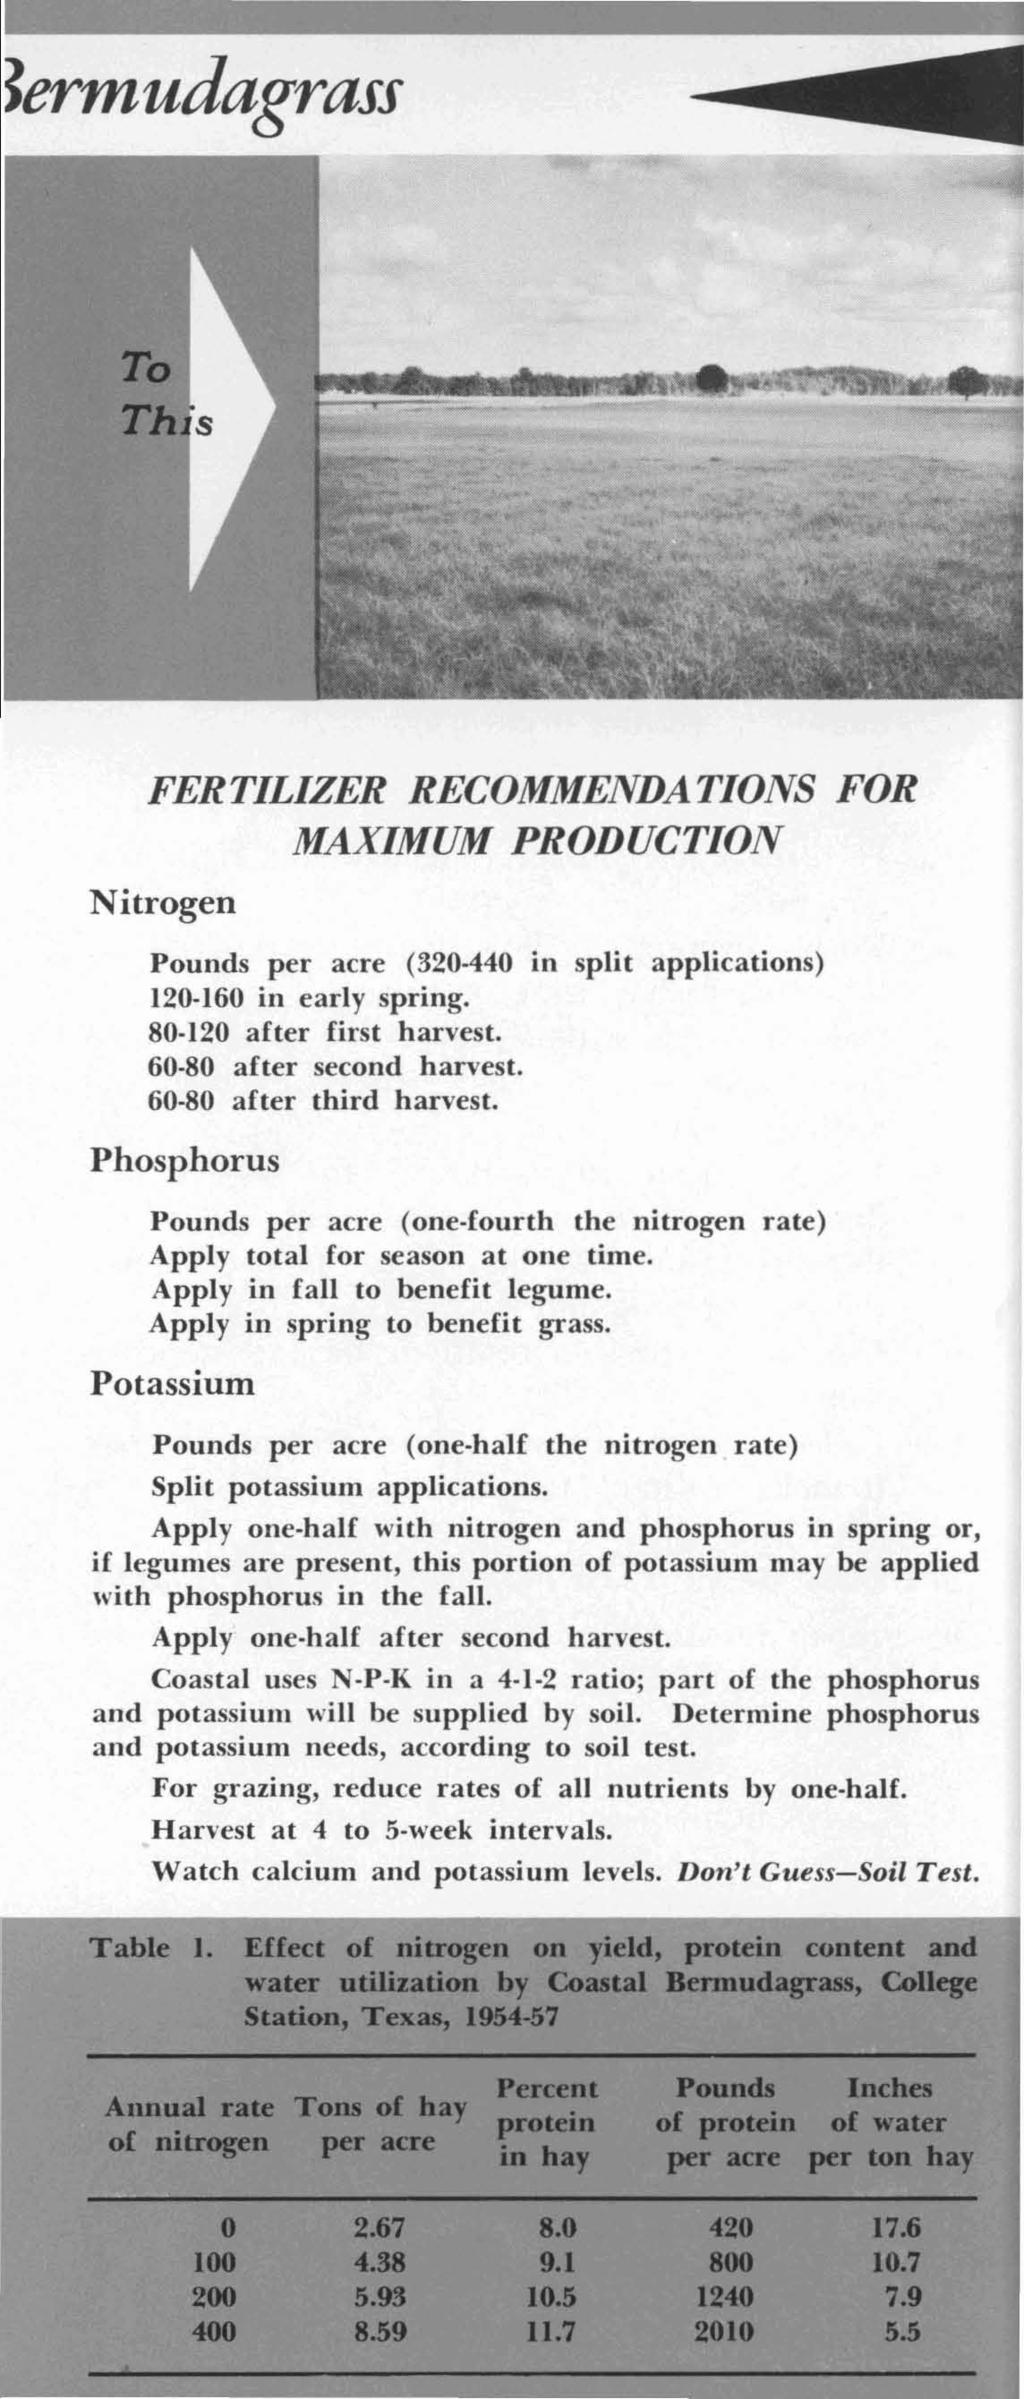 ~ermudagrass FERTILIZER RECOMMENDATIONS FOR MAXIMUM PRODUCTION Nitrogen Pounds per acre (320-440 in split applications) 120-160 in early spring. 80 120 after first harvest. 60-80 after second harvest.